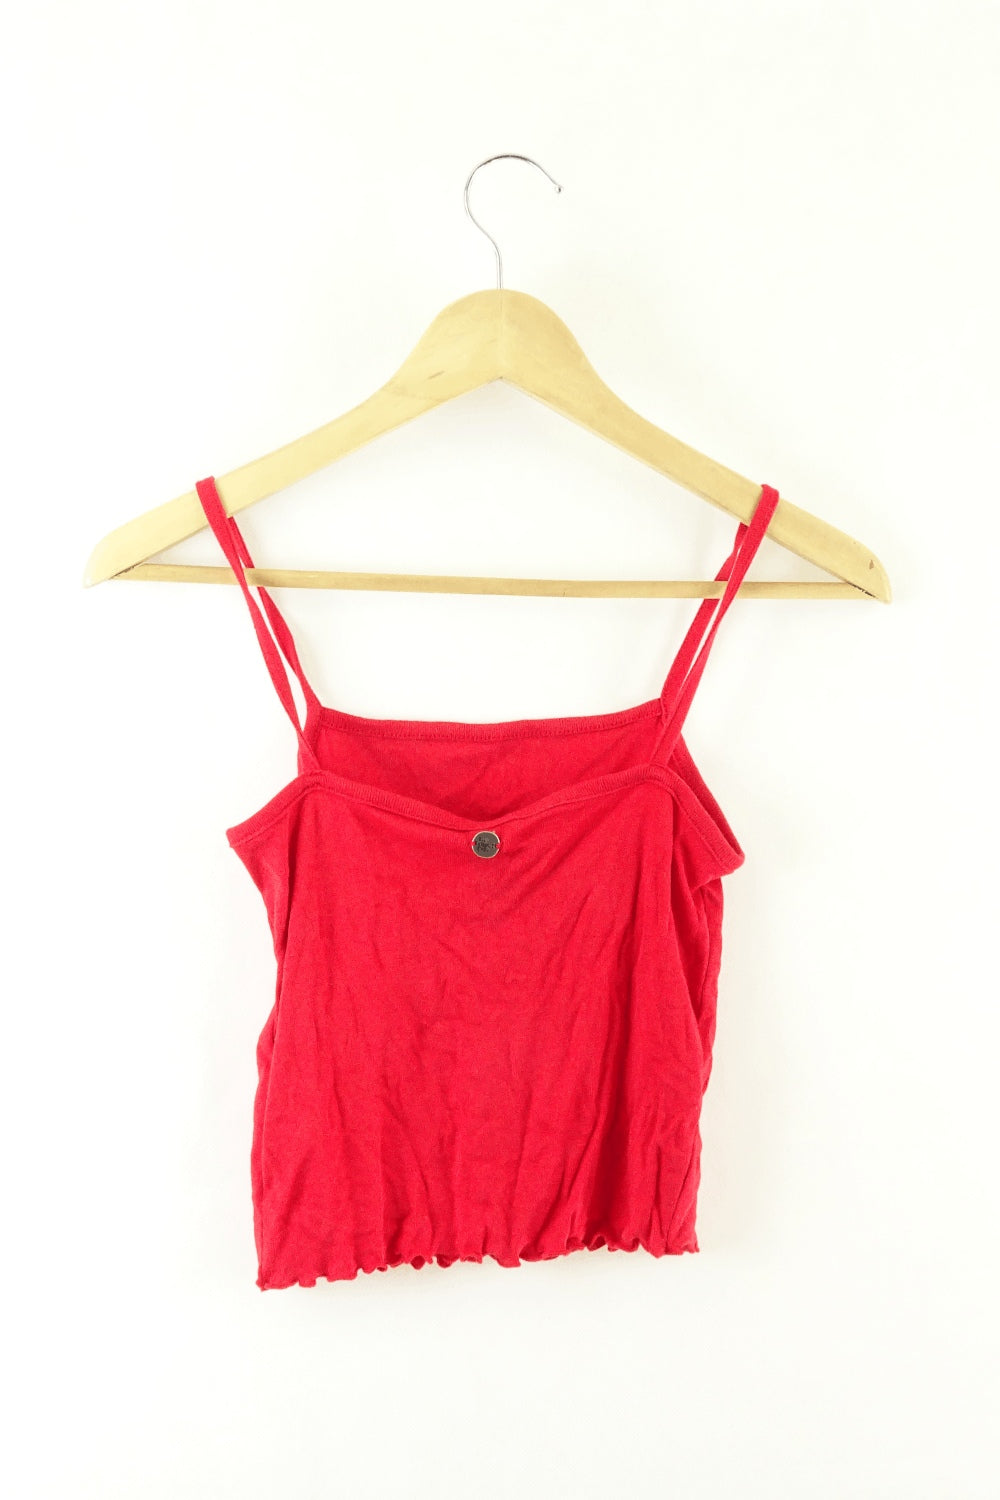 All About Eve Red Cropped Top 8